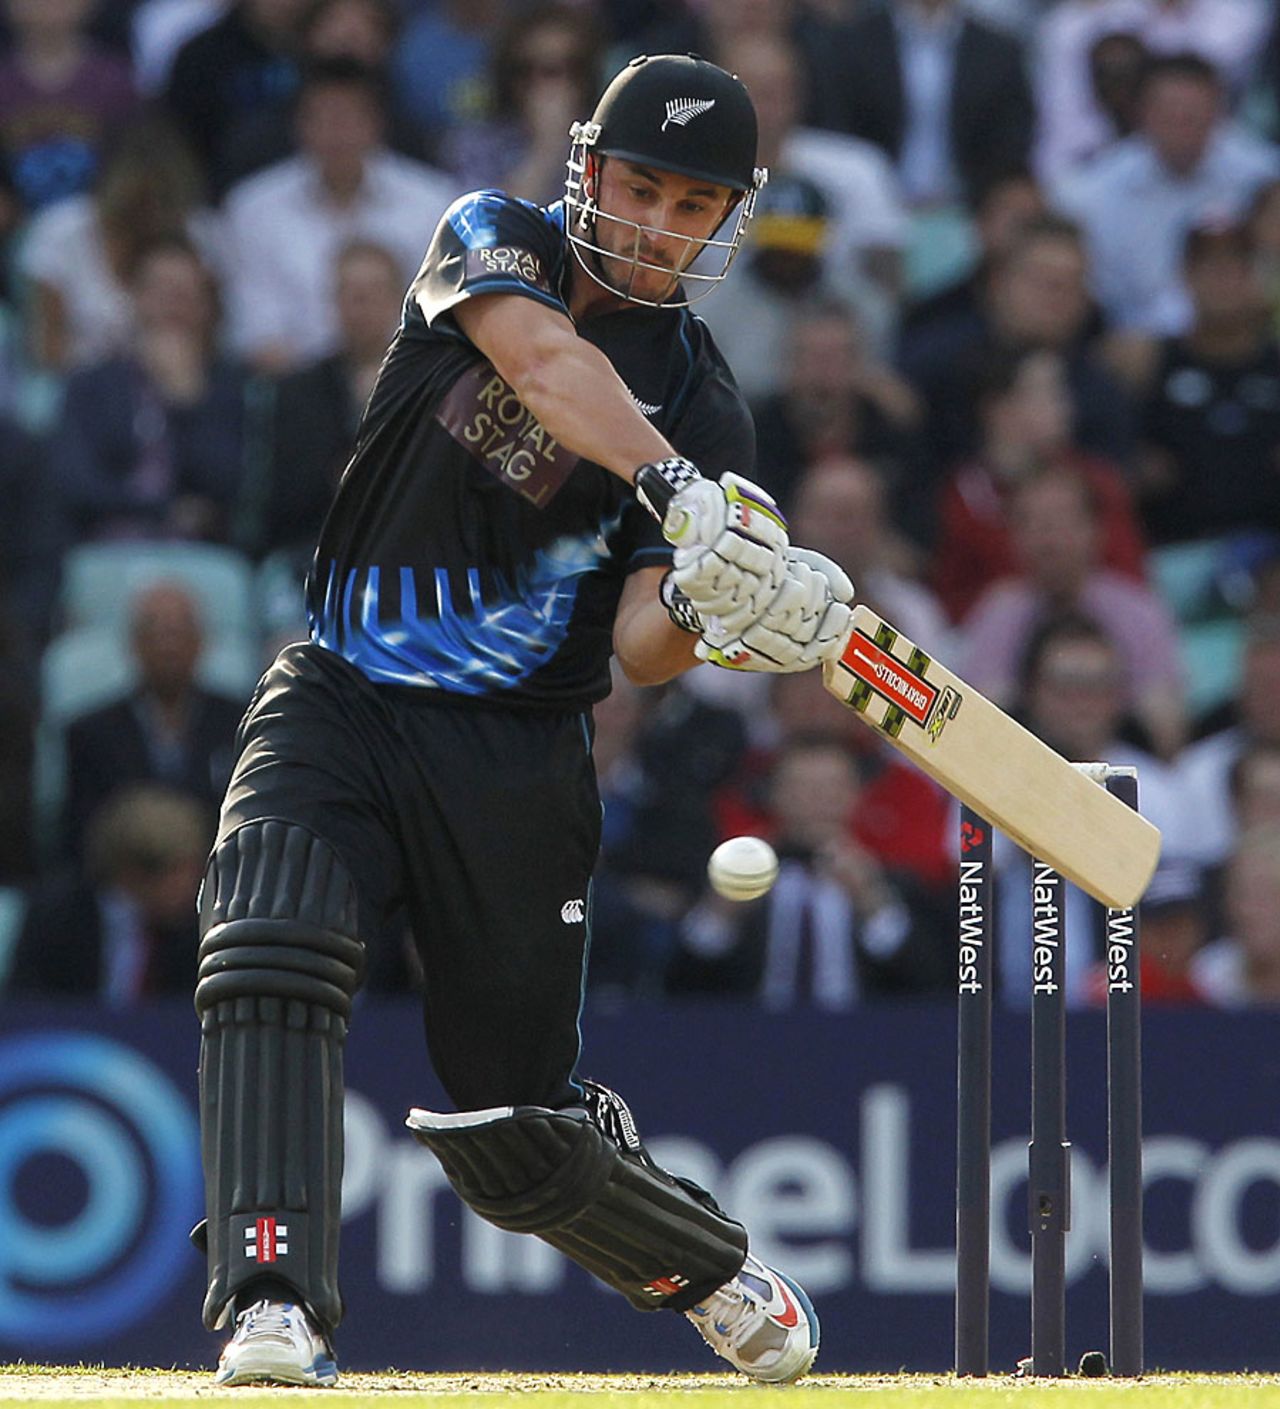 Hamish Rutherford goes for the big hit, England v New Zealand, 1st T20, The Oval, June 25, 2013